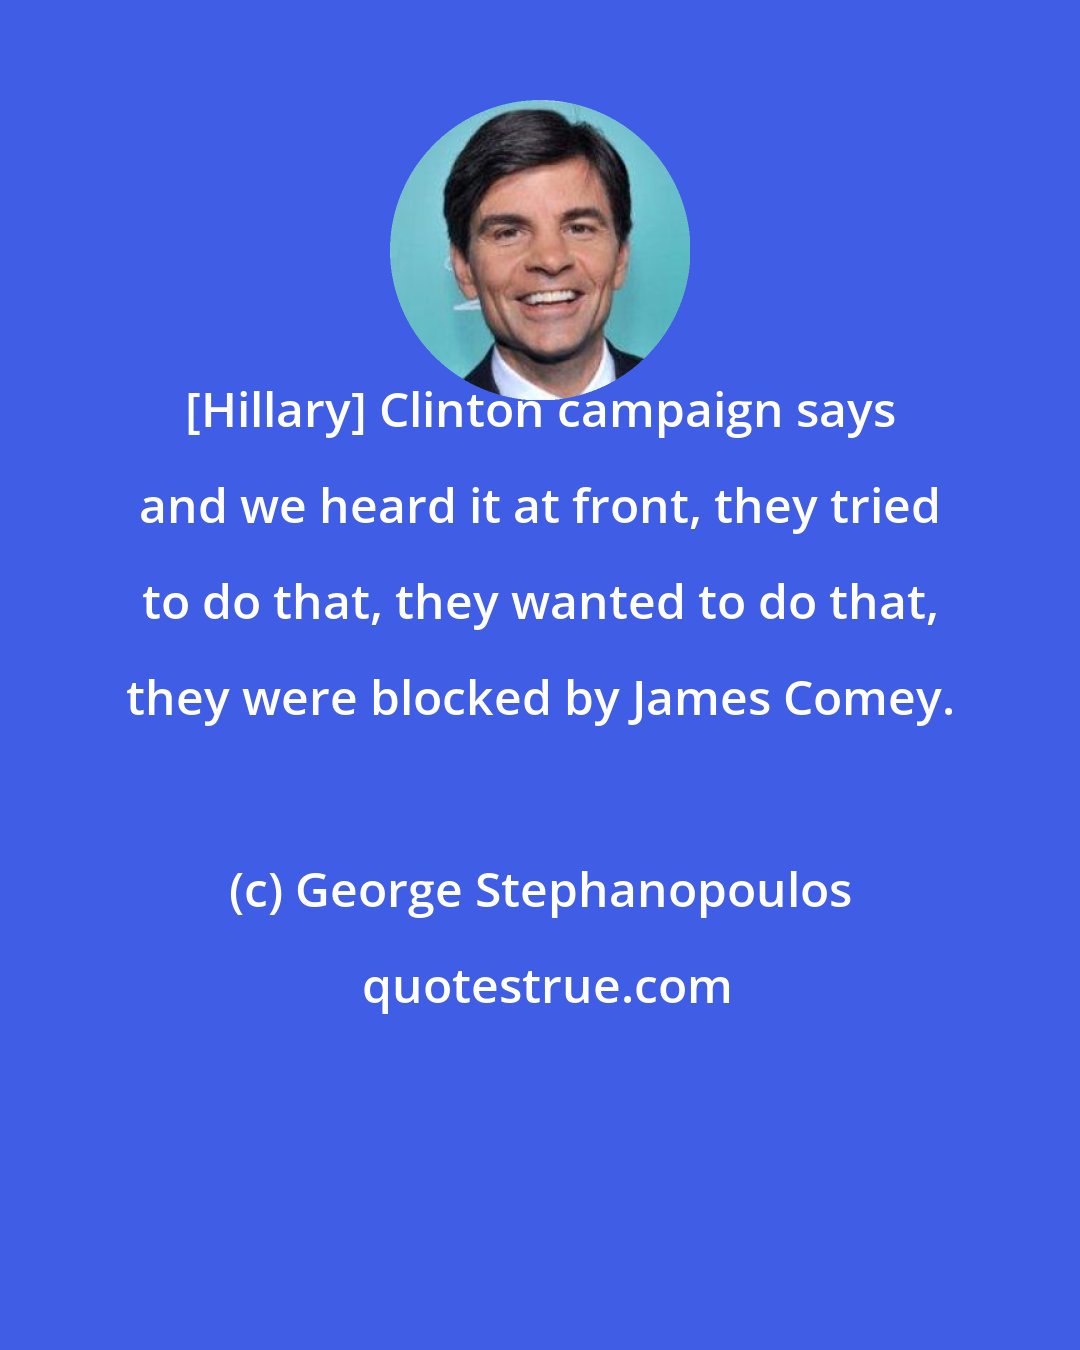 George Stephanopoulos: [Hillary] Clinton campaign says and we heard it at front, they tried to do that, they wanted to do that, they were blocked by James Comey.